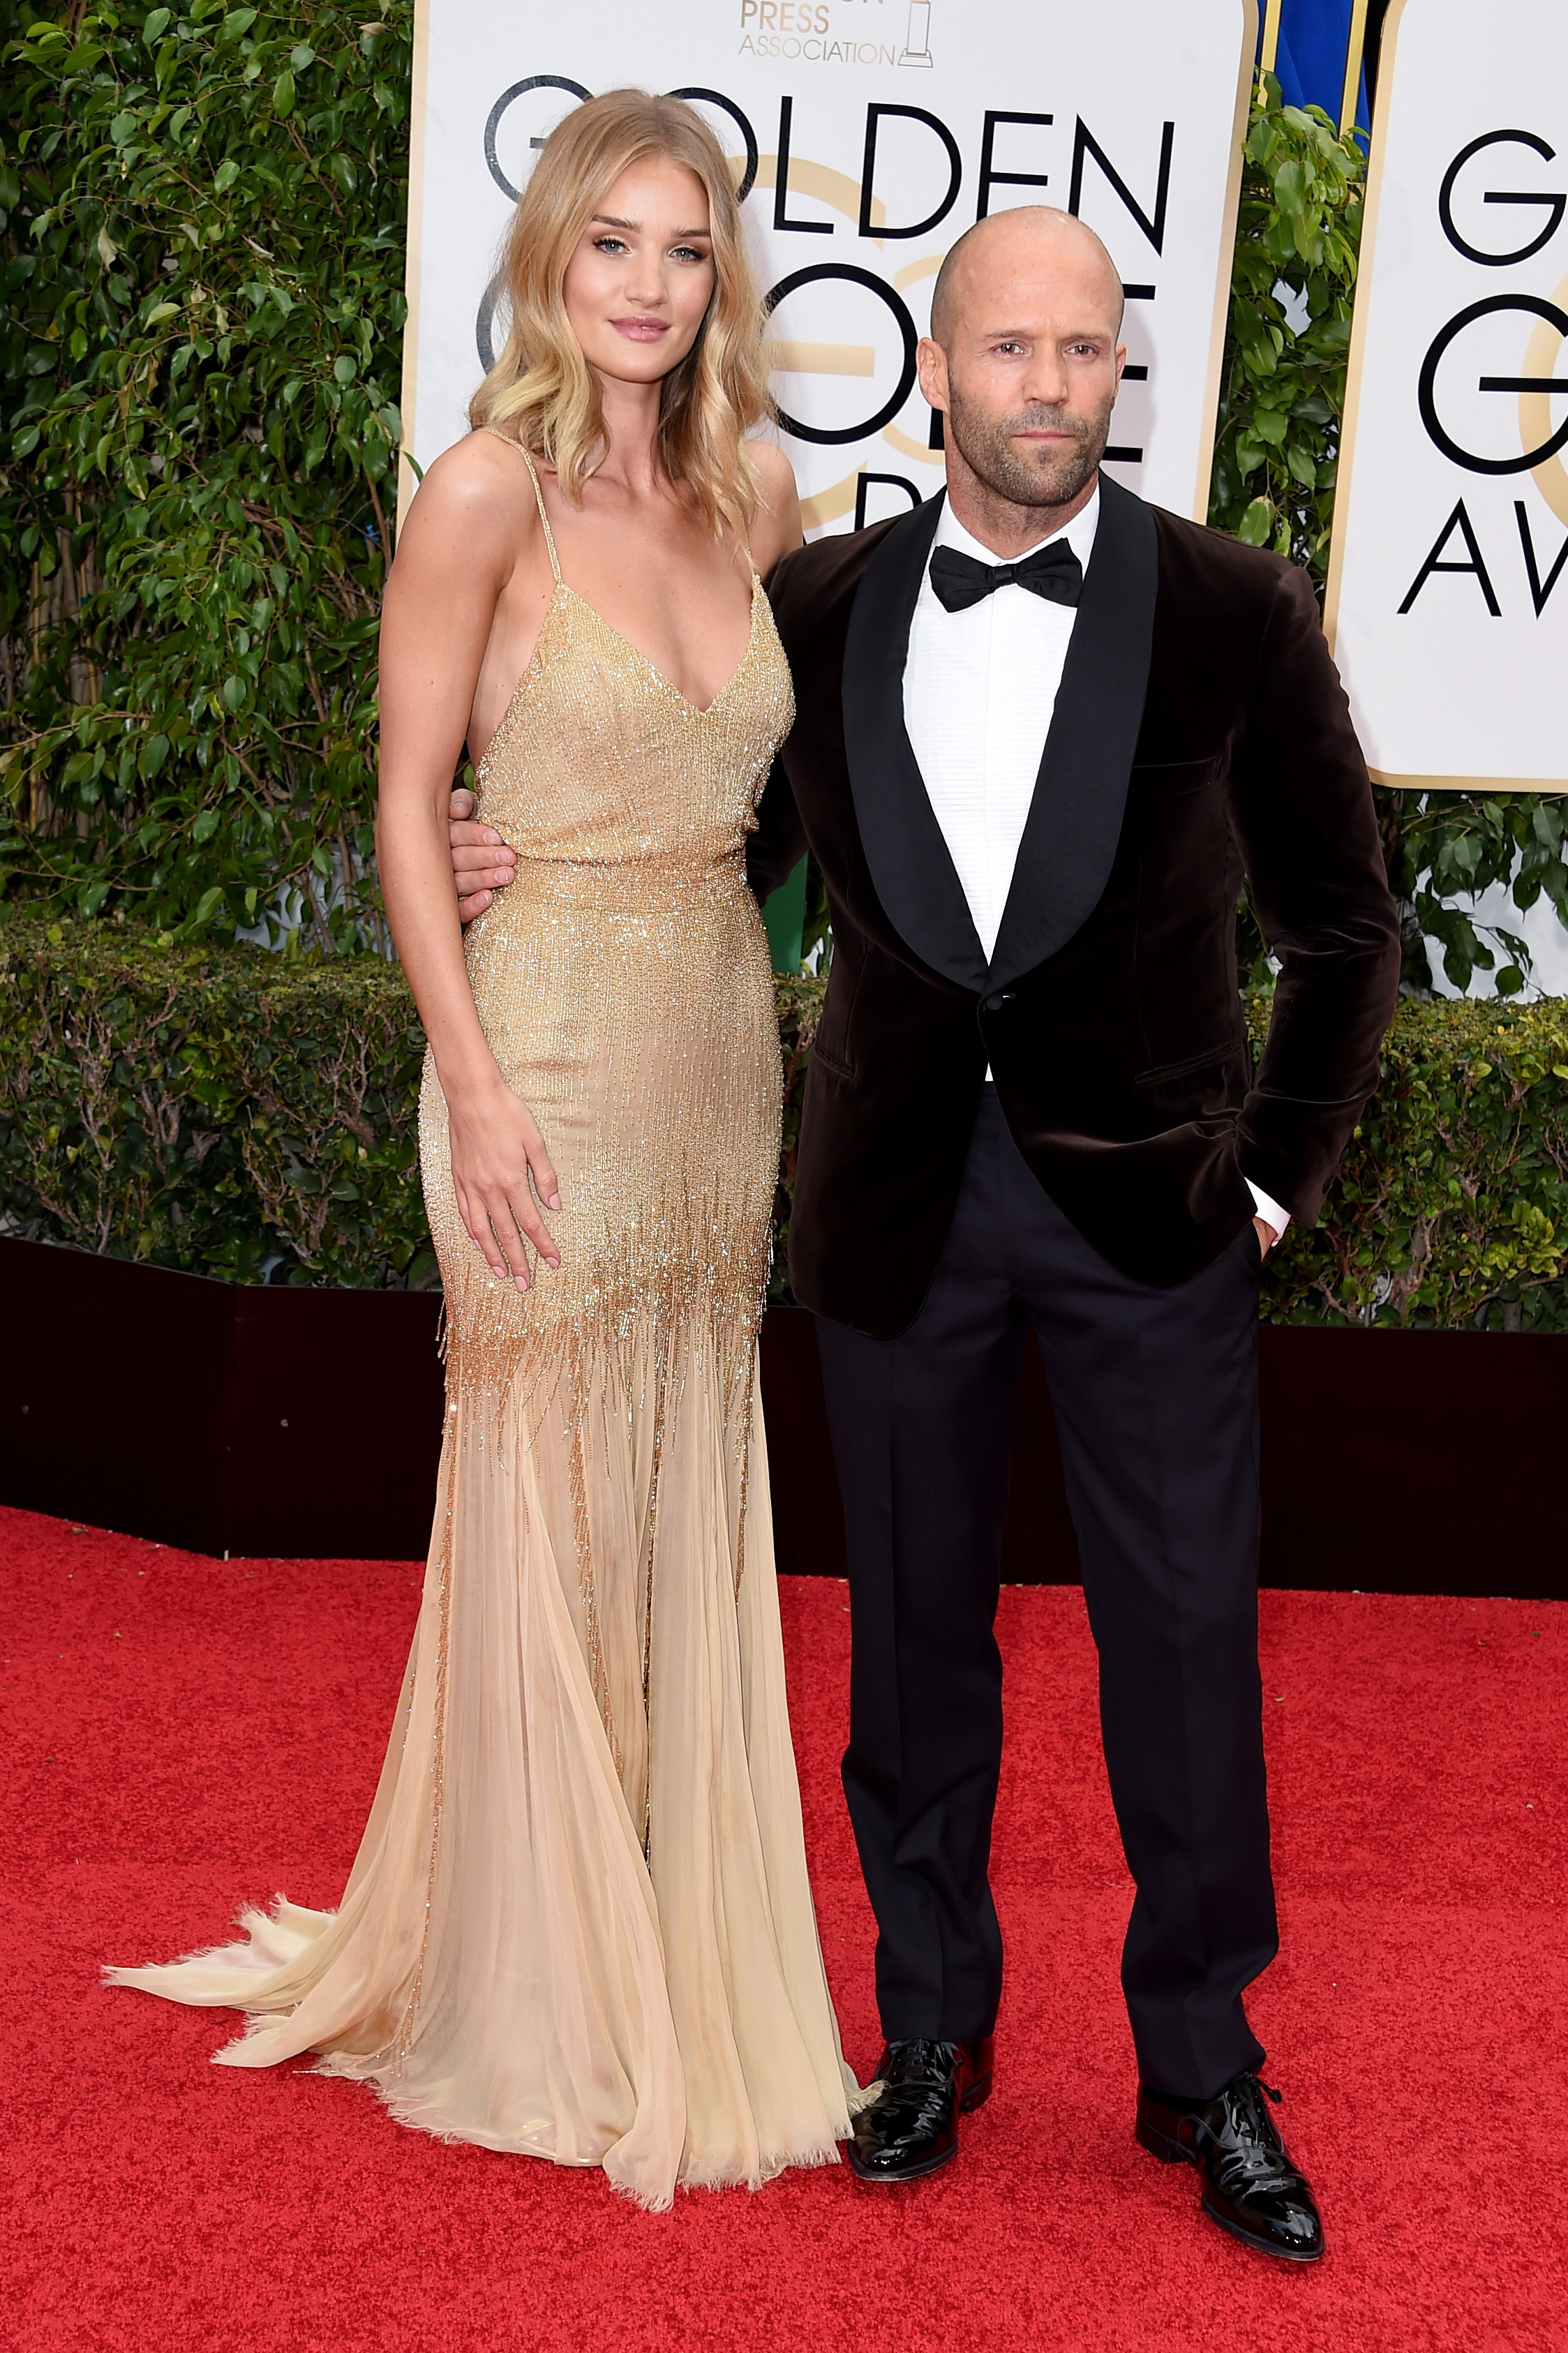 Rosie Huntington-Whiteley and Jason Statham arrive to the 73rd Annual Golden Globe Awards on Jan. 10, 2016 in Beverly Hills.